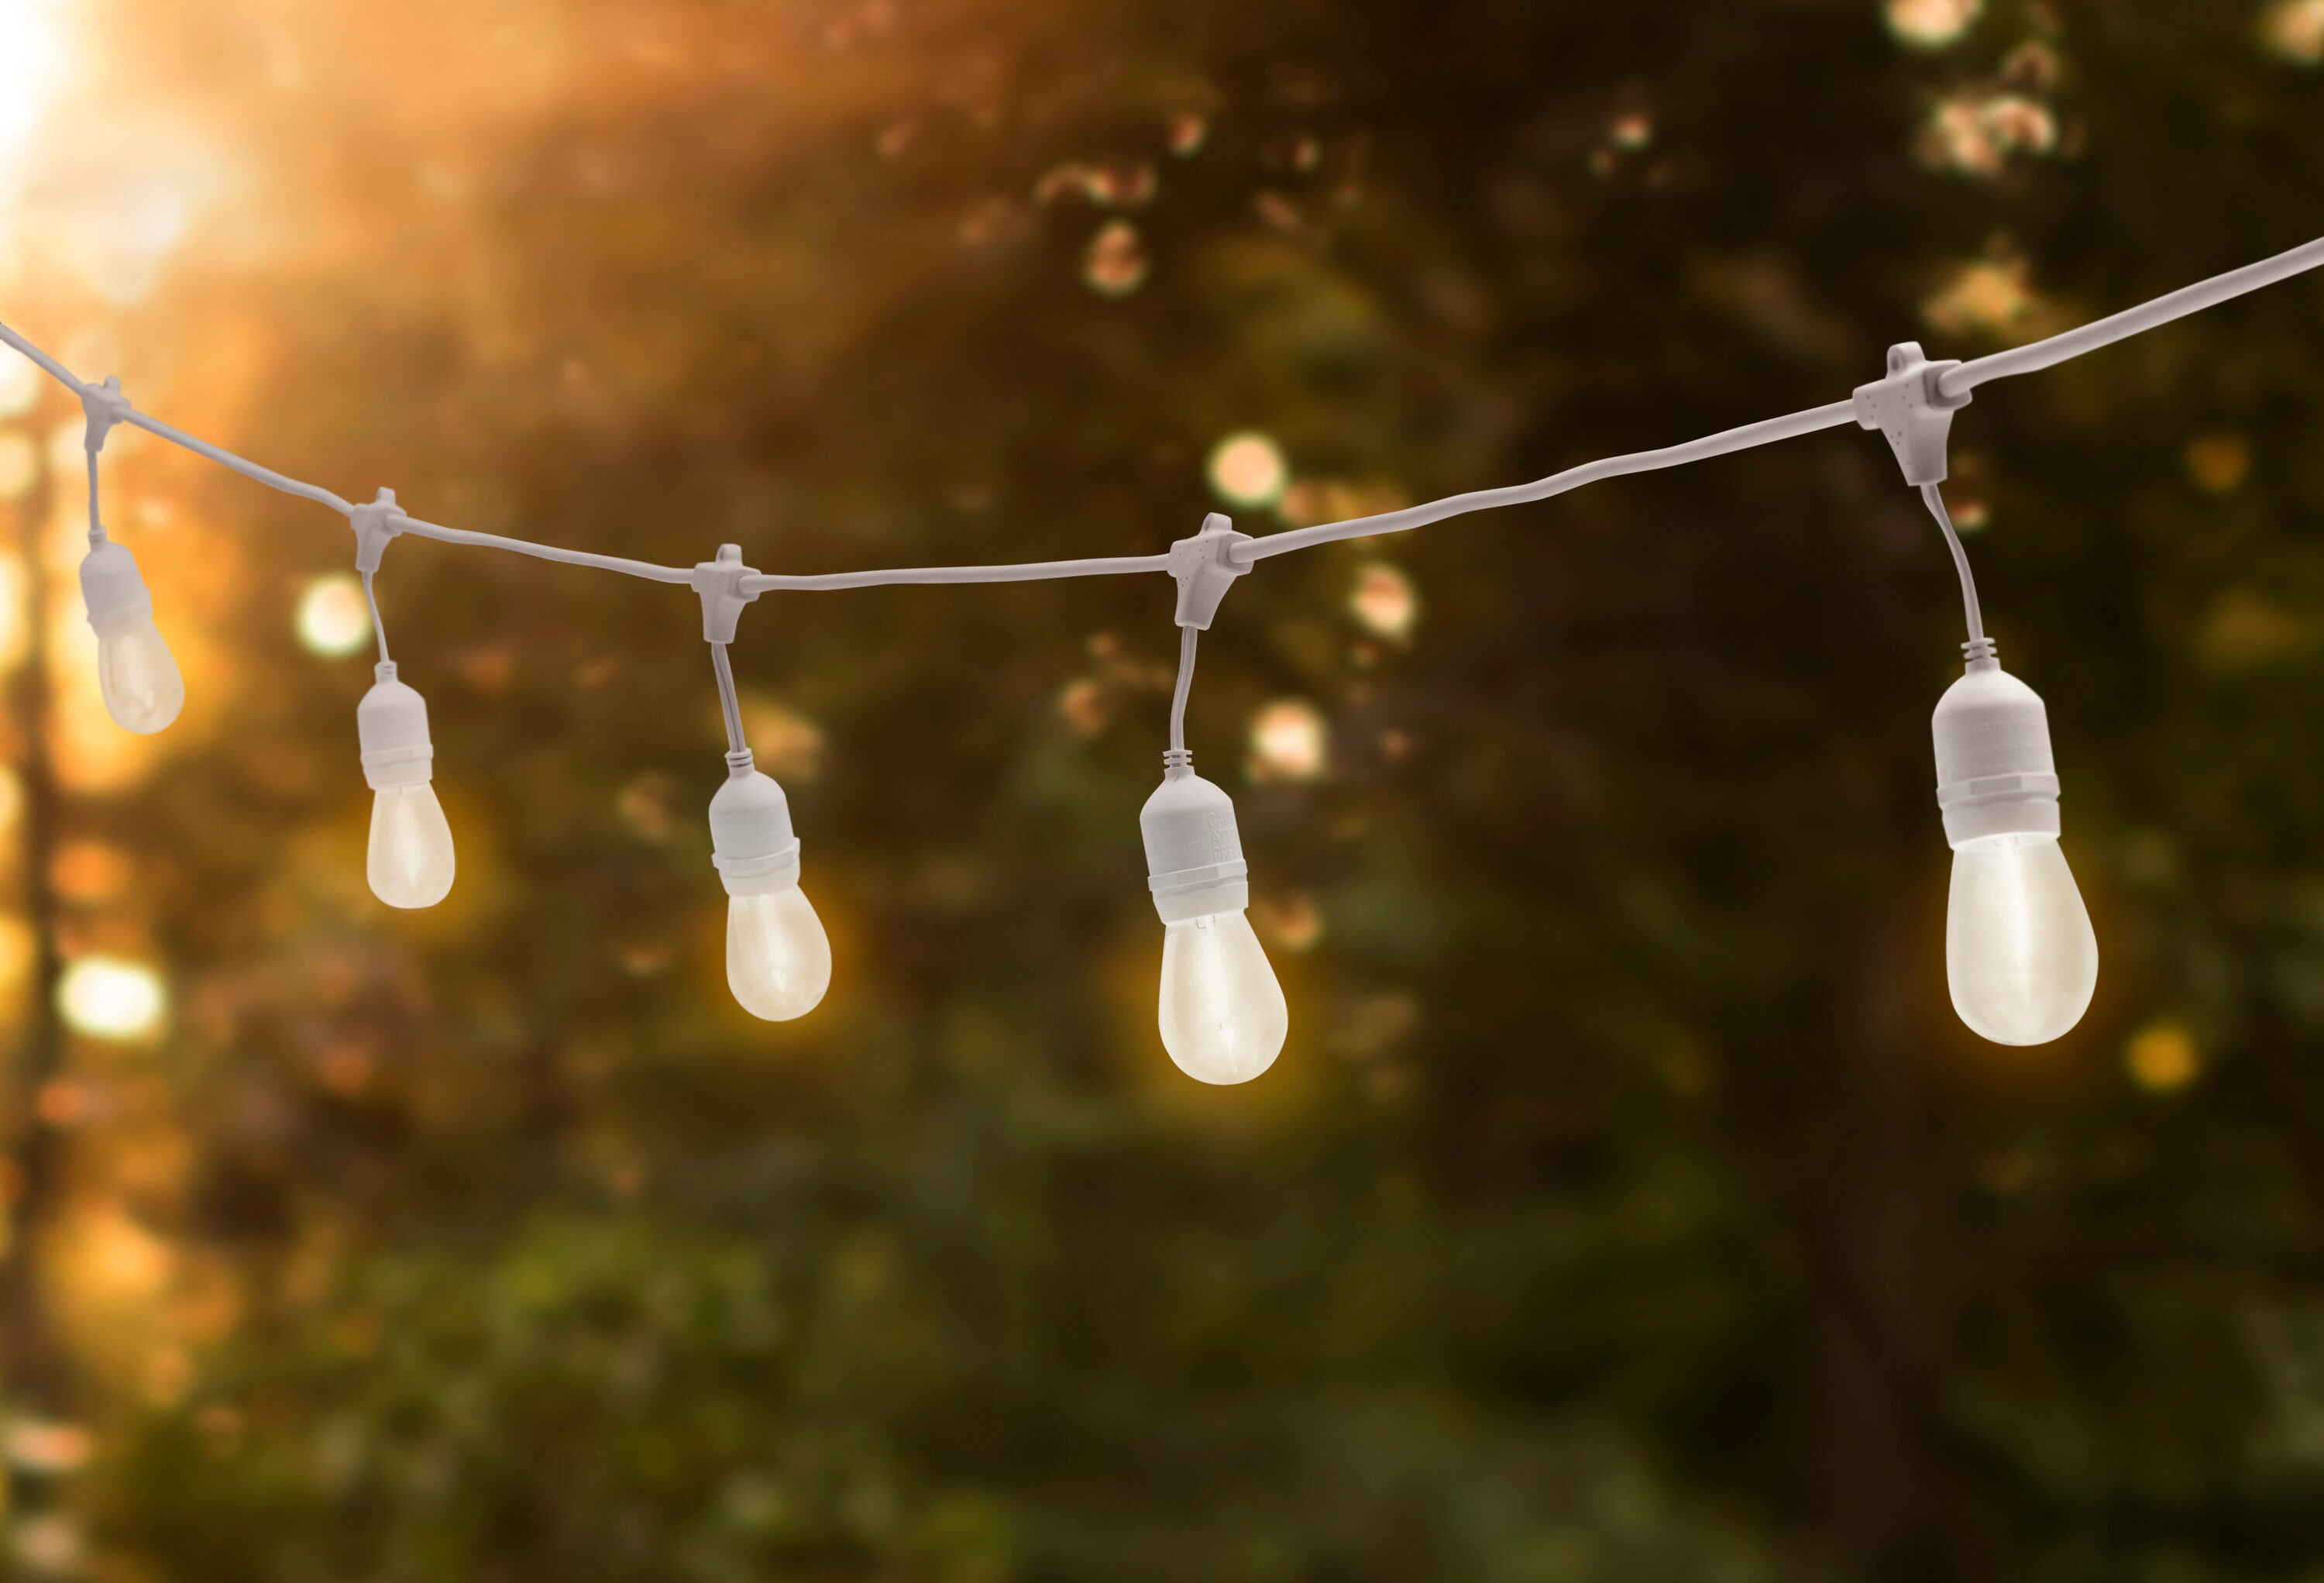 Govee's outdoor Wi-Fi LED string light kit beats Cyber Monday